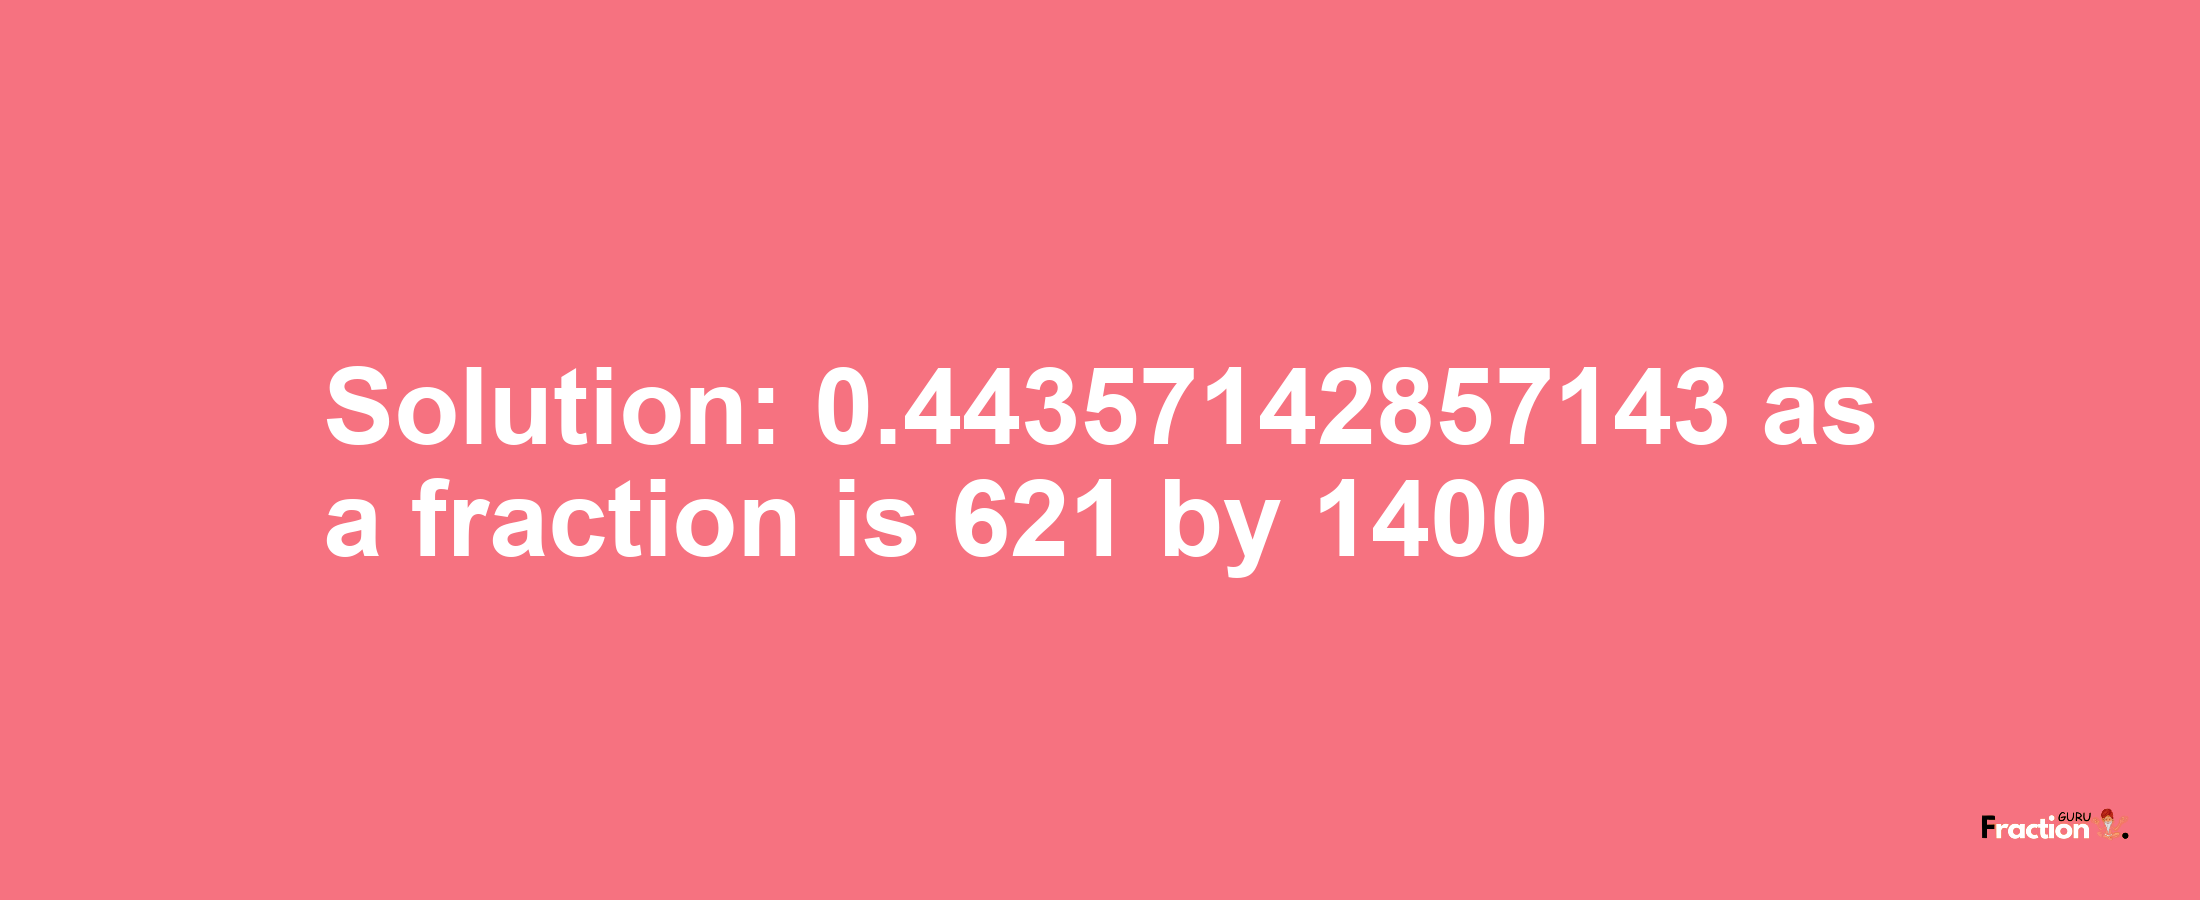 Solution:0.44357142857143 as a fraction is 621/1400